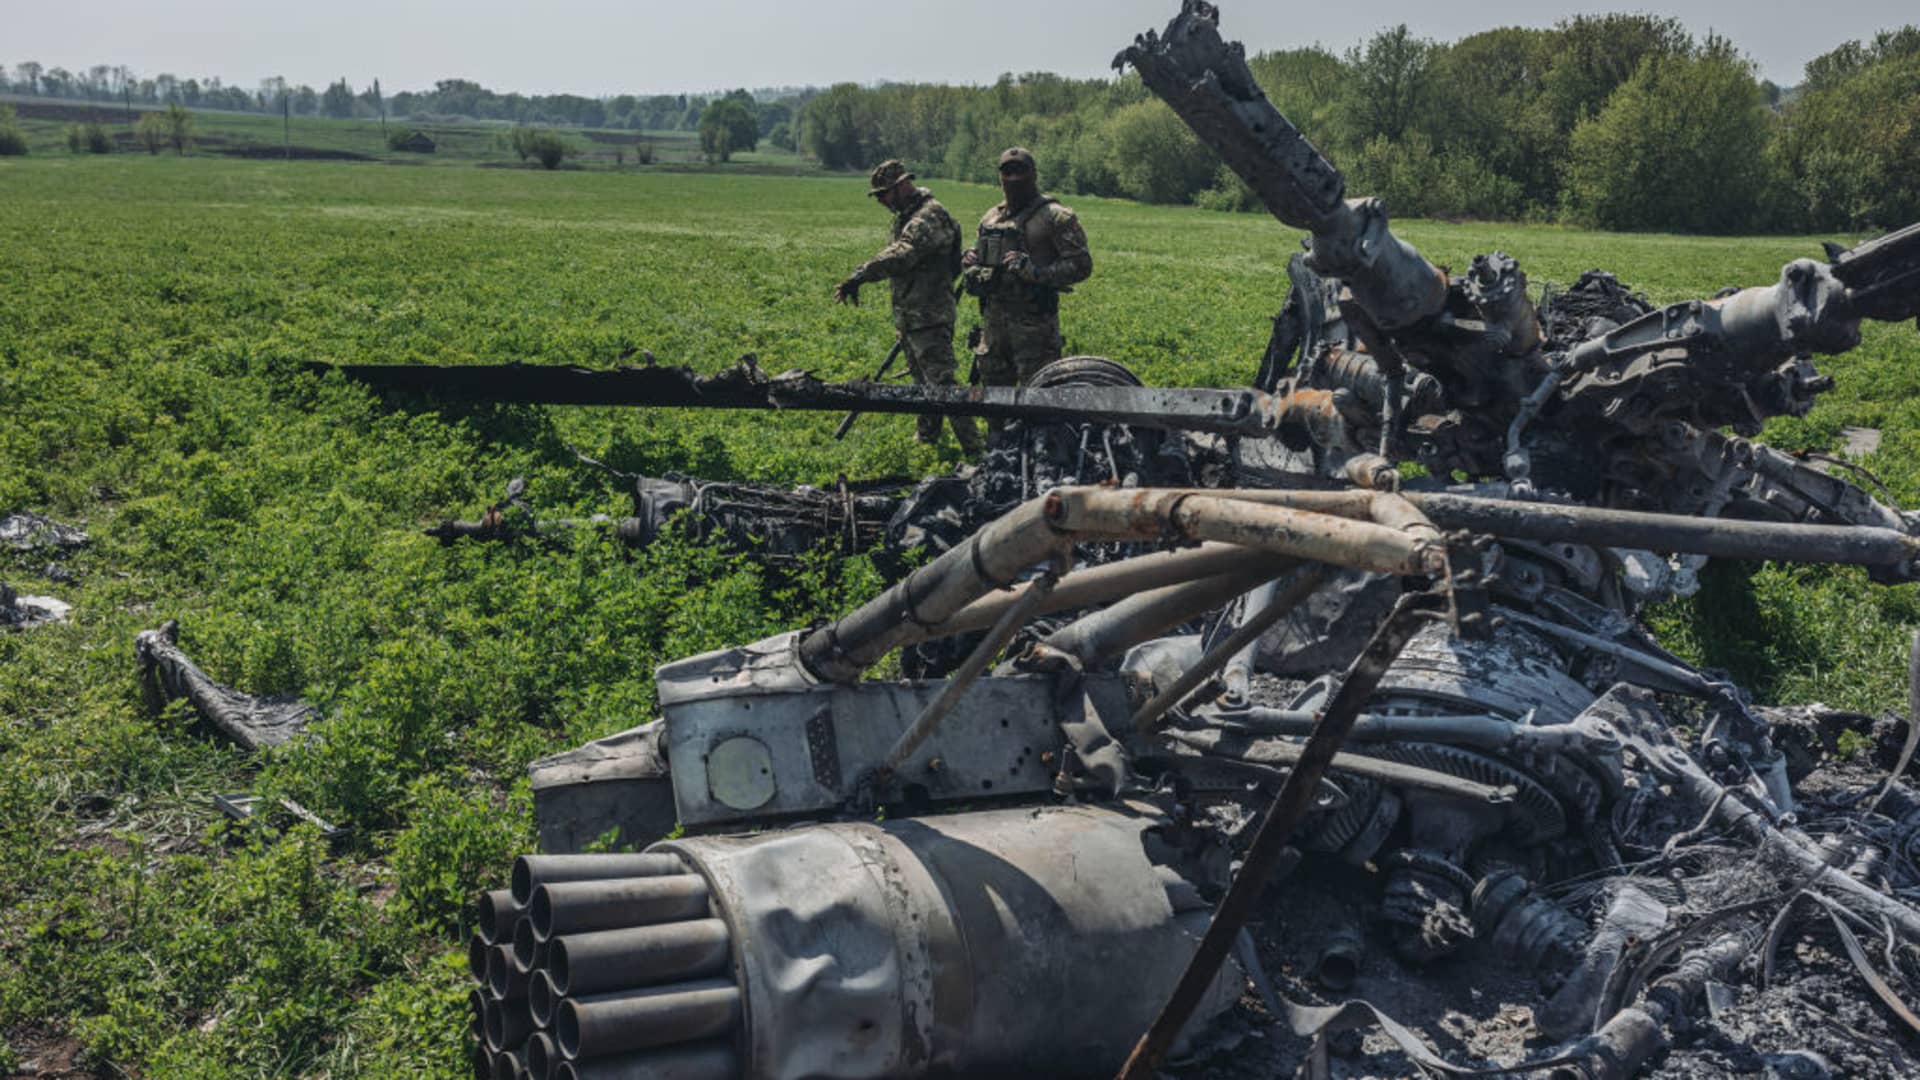 KHARKIV, UKRAINE - MAY 8: Ukrainian soldiers in a downed Russian helicopter in the outskirts of Kharkiv, Ukraine, 8 May 2022 (Photo by Diego Herrera Carcedo/Anadolu Agency via Getty Images)